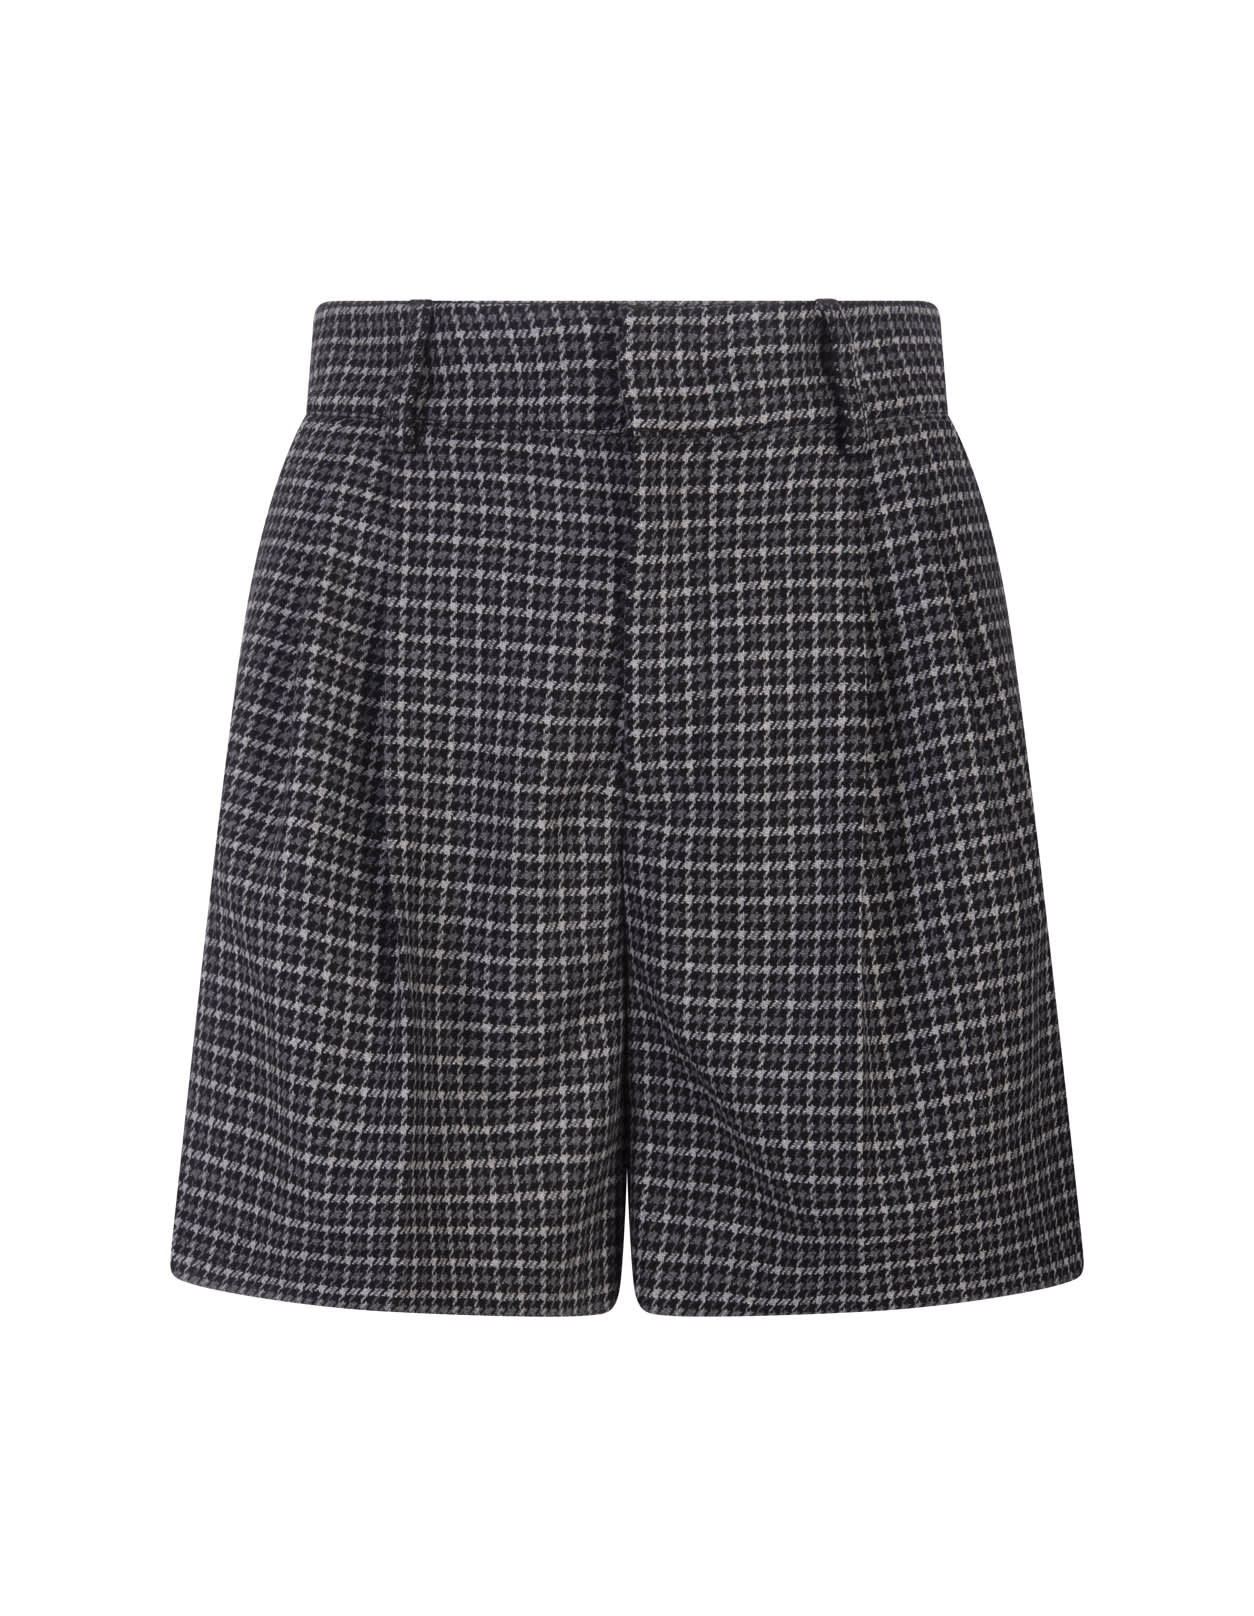 RED Valentino Woman Black Houndstooth Shorts